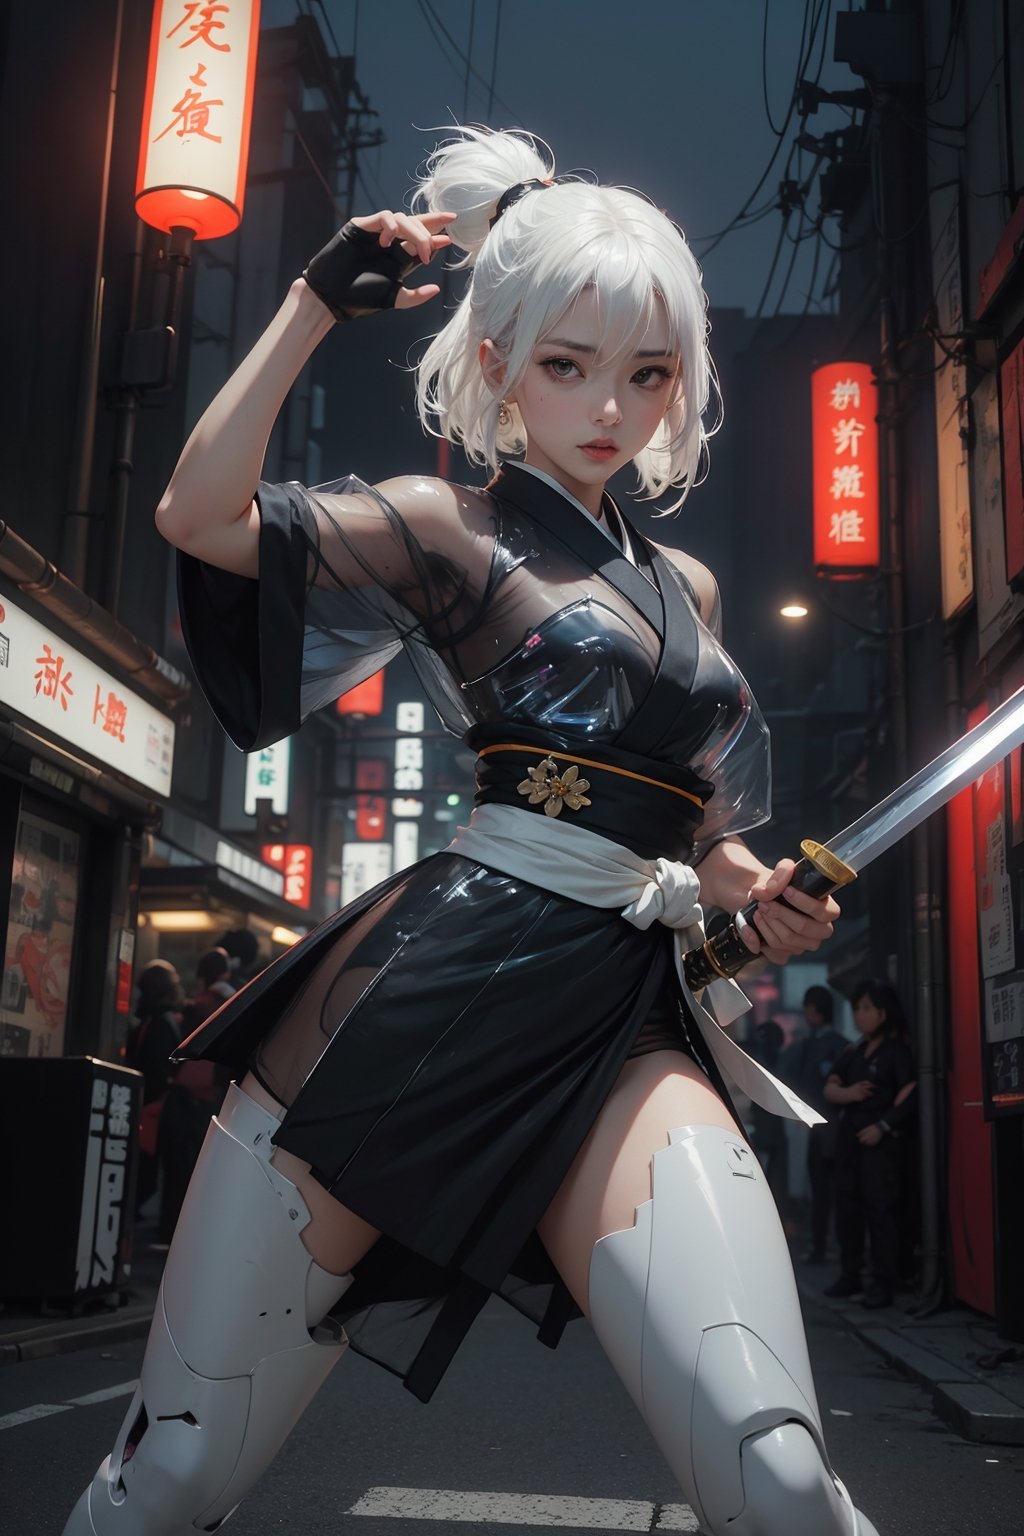 ((dynamic pose)), masterpiece, 1 kunoichi, muted color+soothing tones, ((white hair)), (black transparent plastic warrior kimono+body implants,holding a sword) ,(at night),Cyberpunk,A Traditional Japanese Art,Enhance